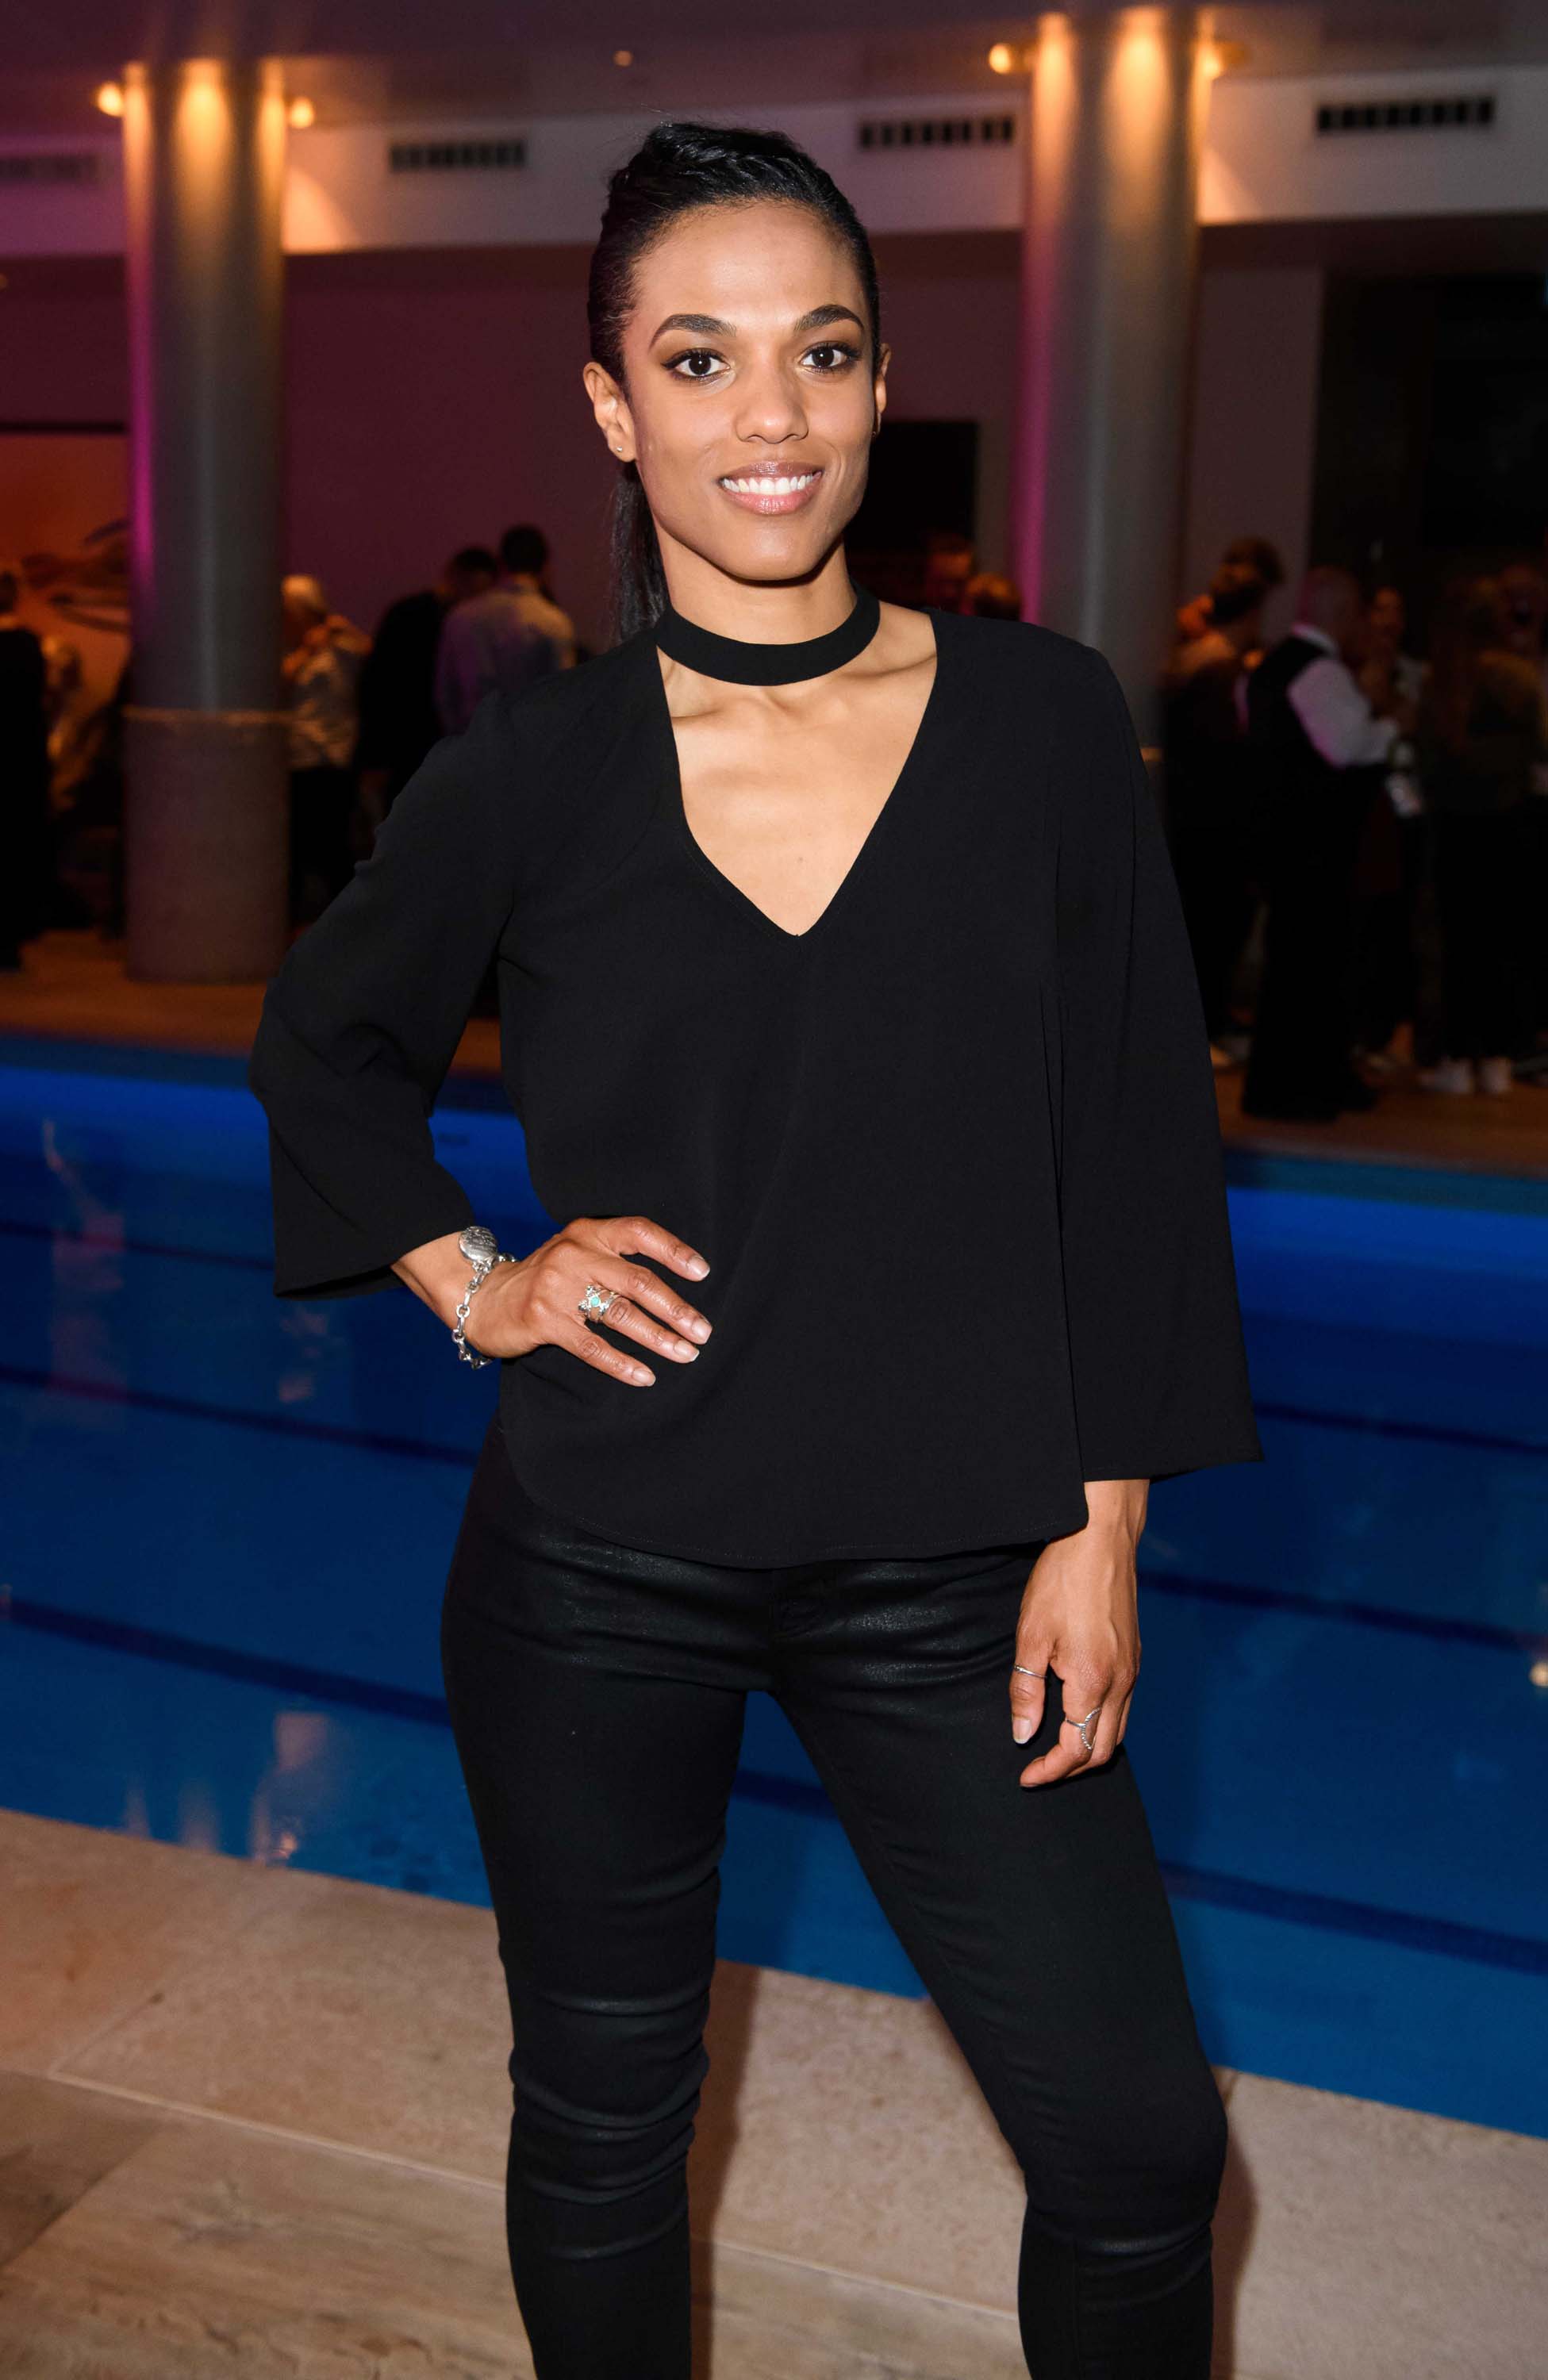 Freema Agyeman seen at the Apologia play after party